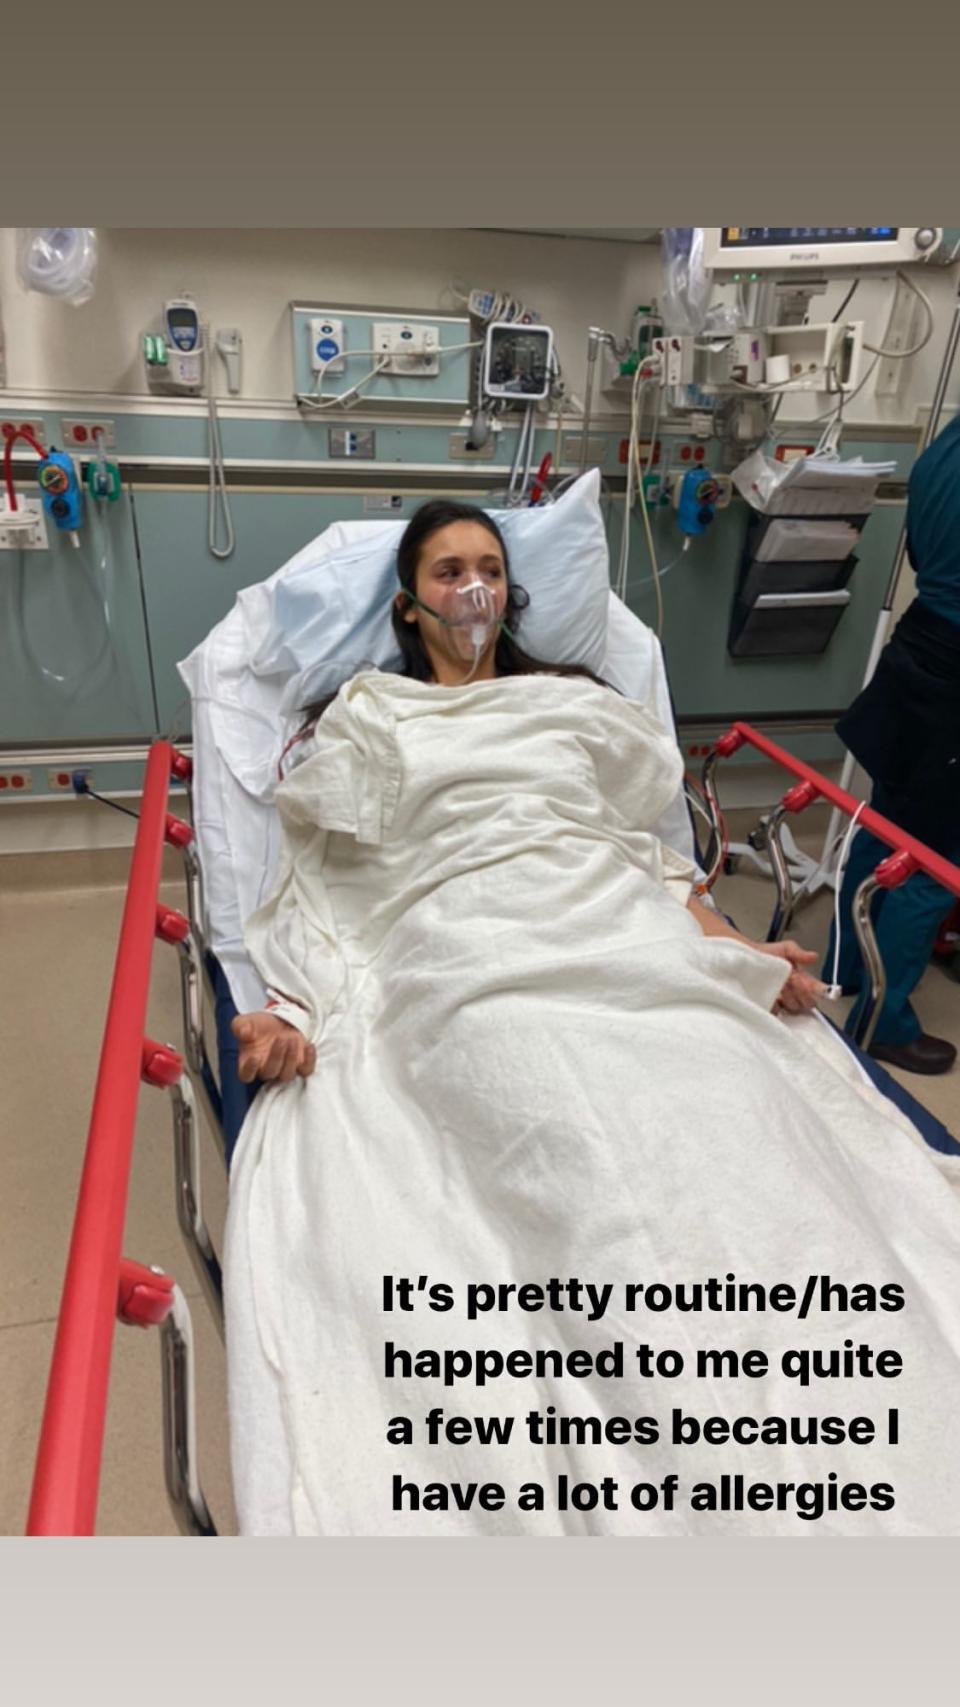 Dobrev, 30, assured Instagram followers that the incident was "pretty routine." (Photo: Instagram)